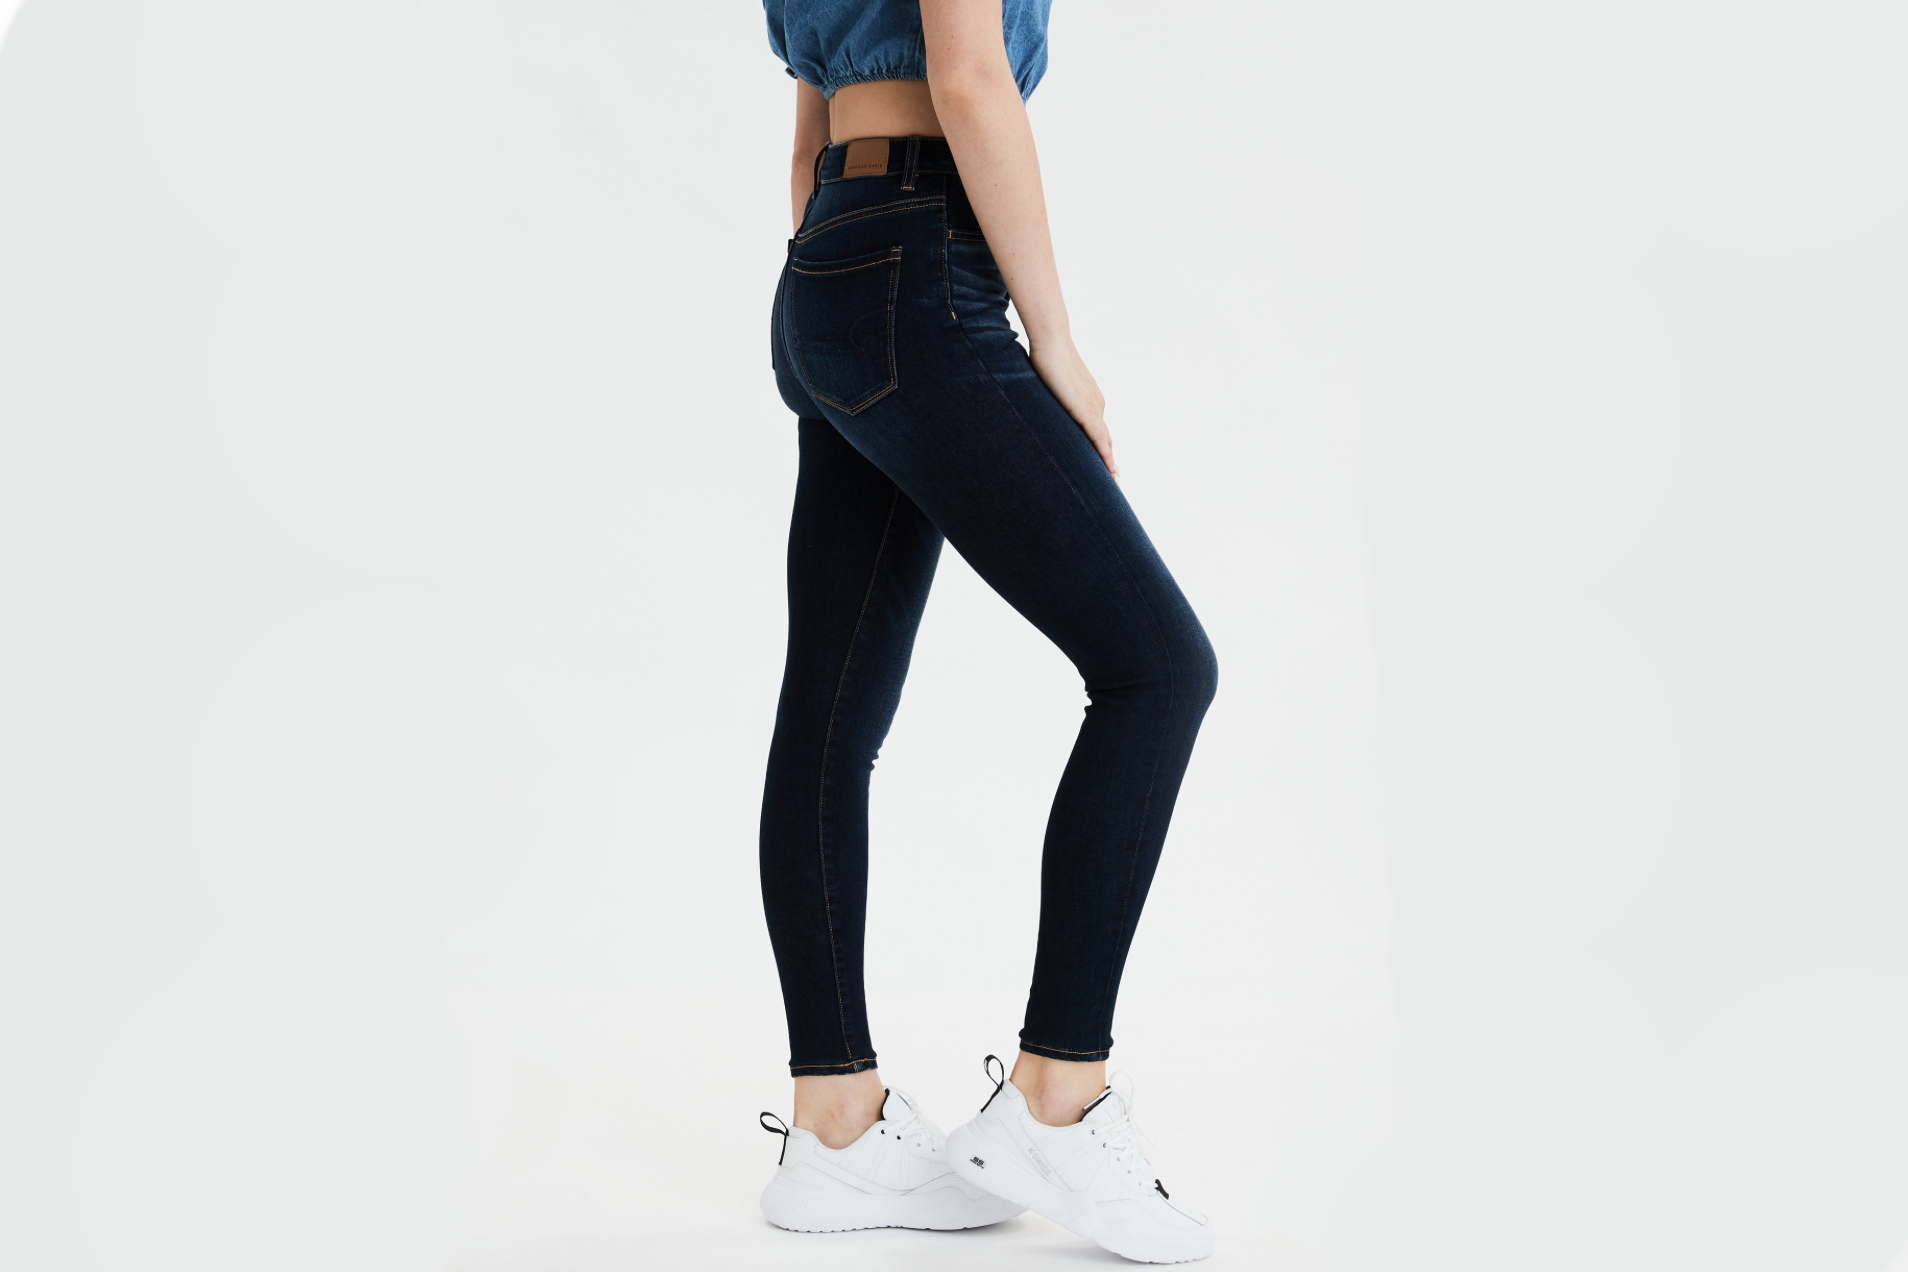 Best High-Waisted Jeans 2020 - Best High-Waisted Skinny Jeans +  MoreHelloGiggles